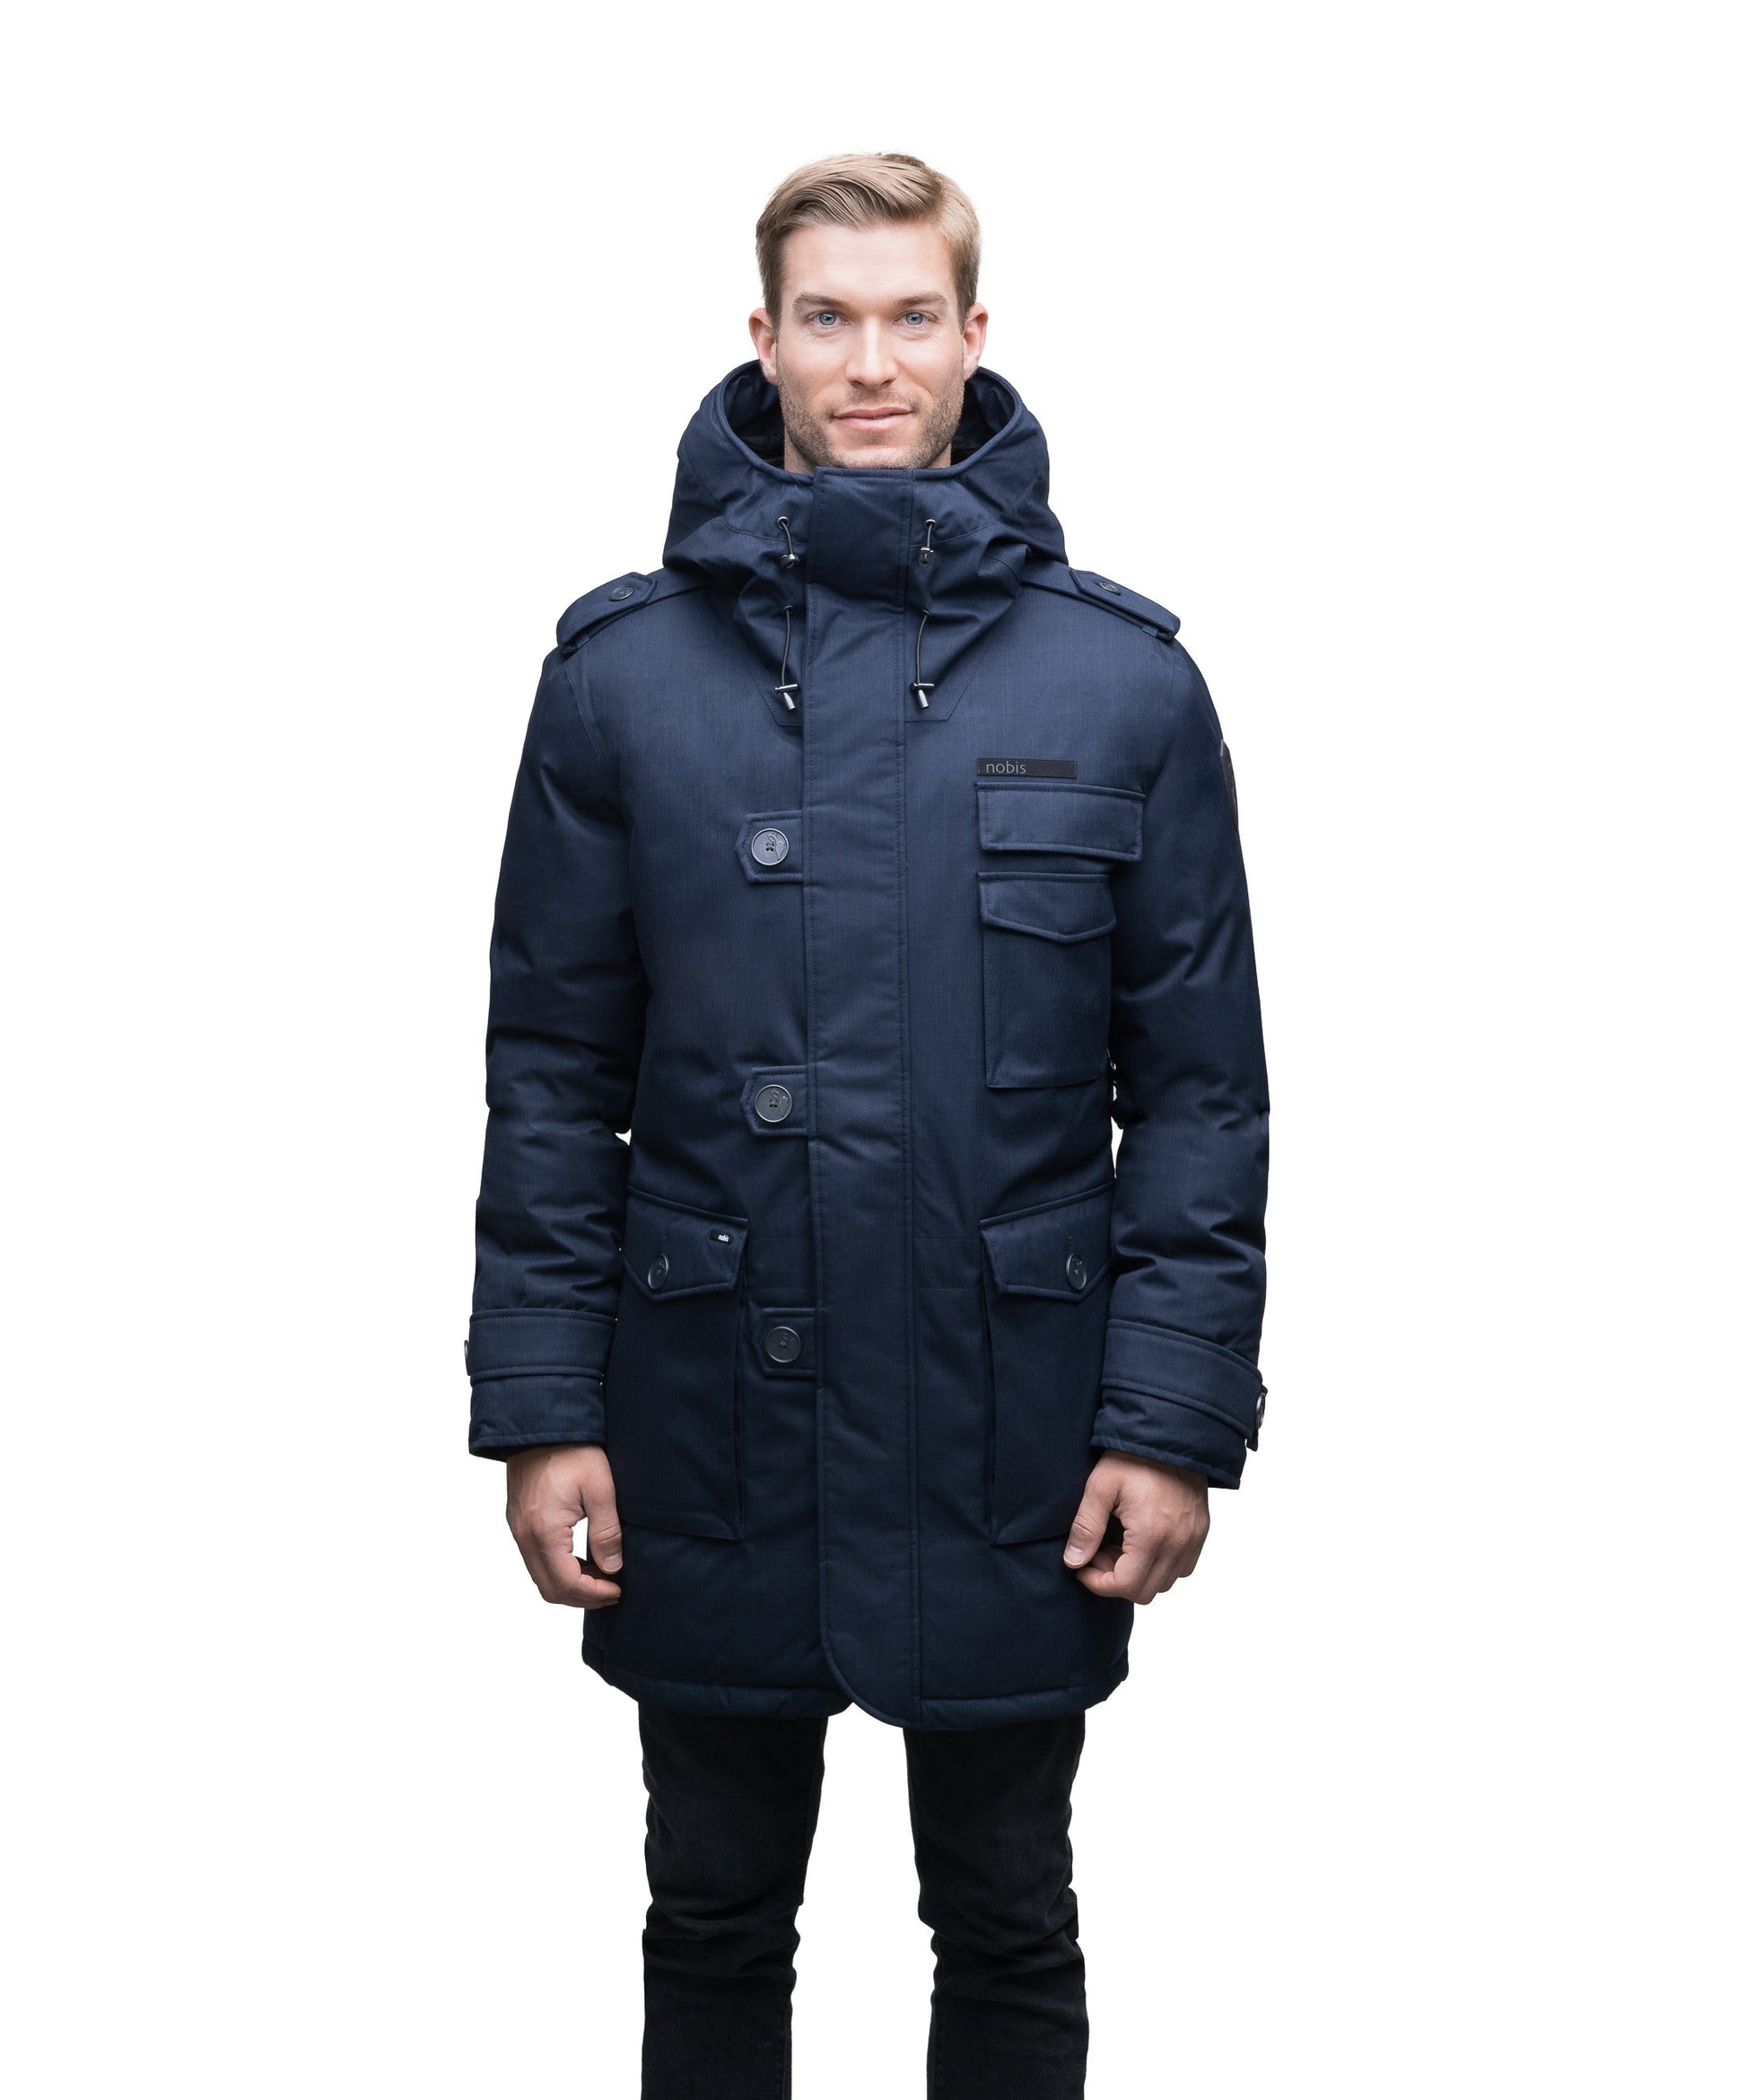 Men's down filled parka with faux button magnet closures and fur free hood with a fishtail hemline in CH Navy